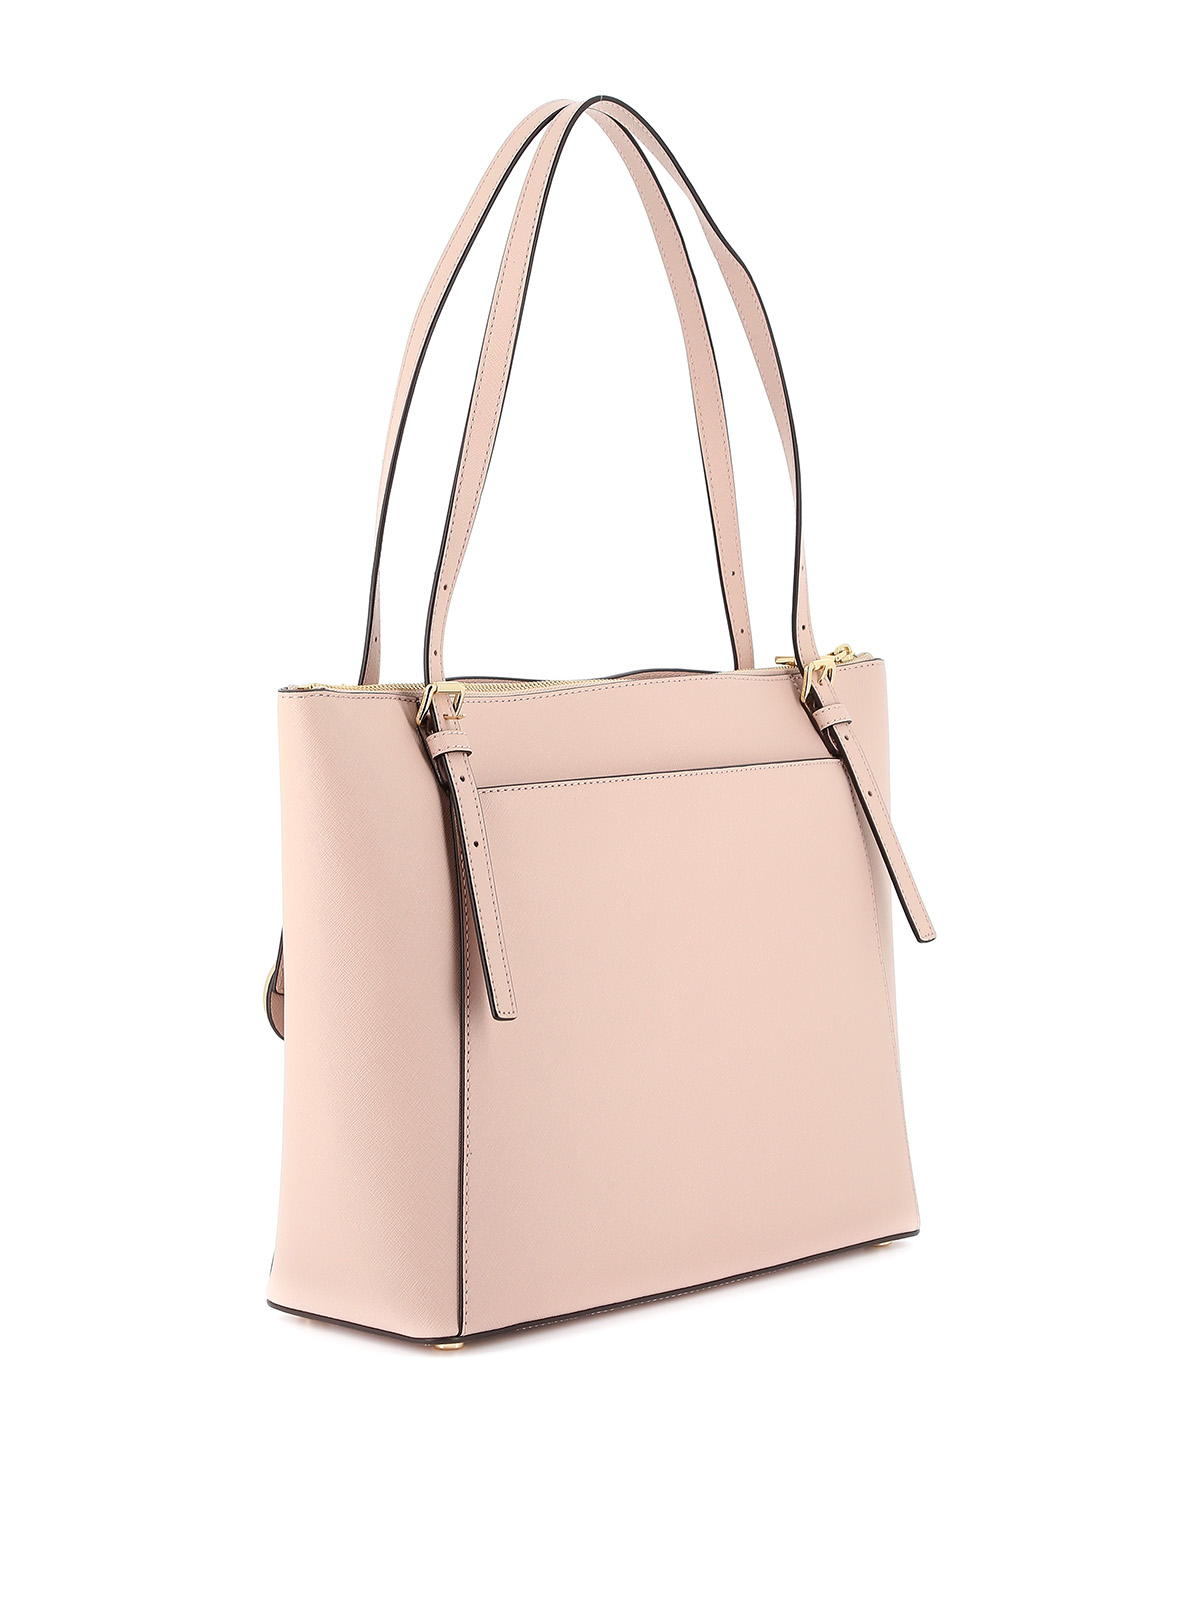 Voyager large saffiano leather tote bag